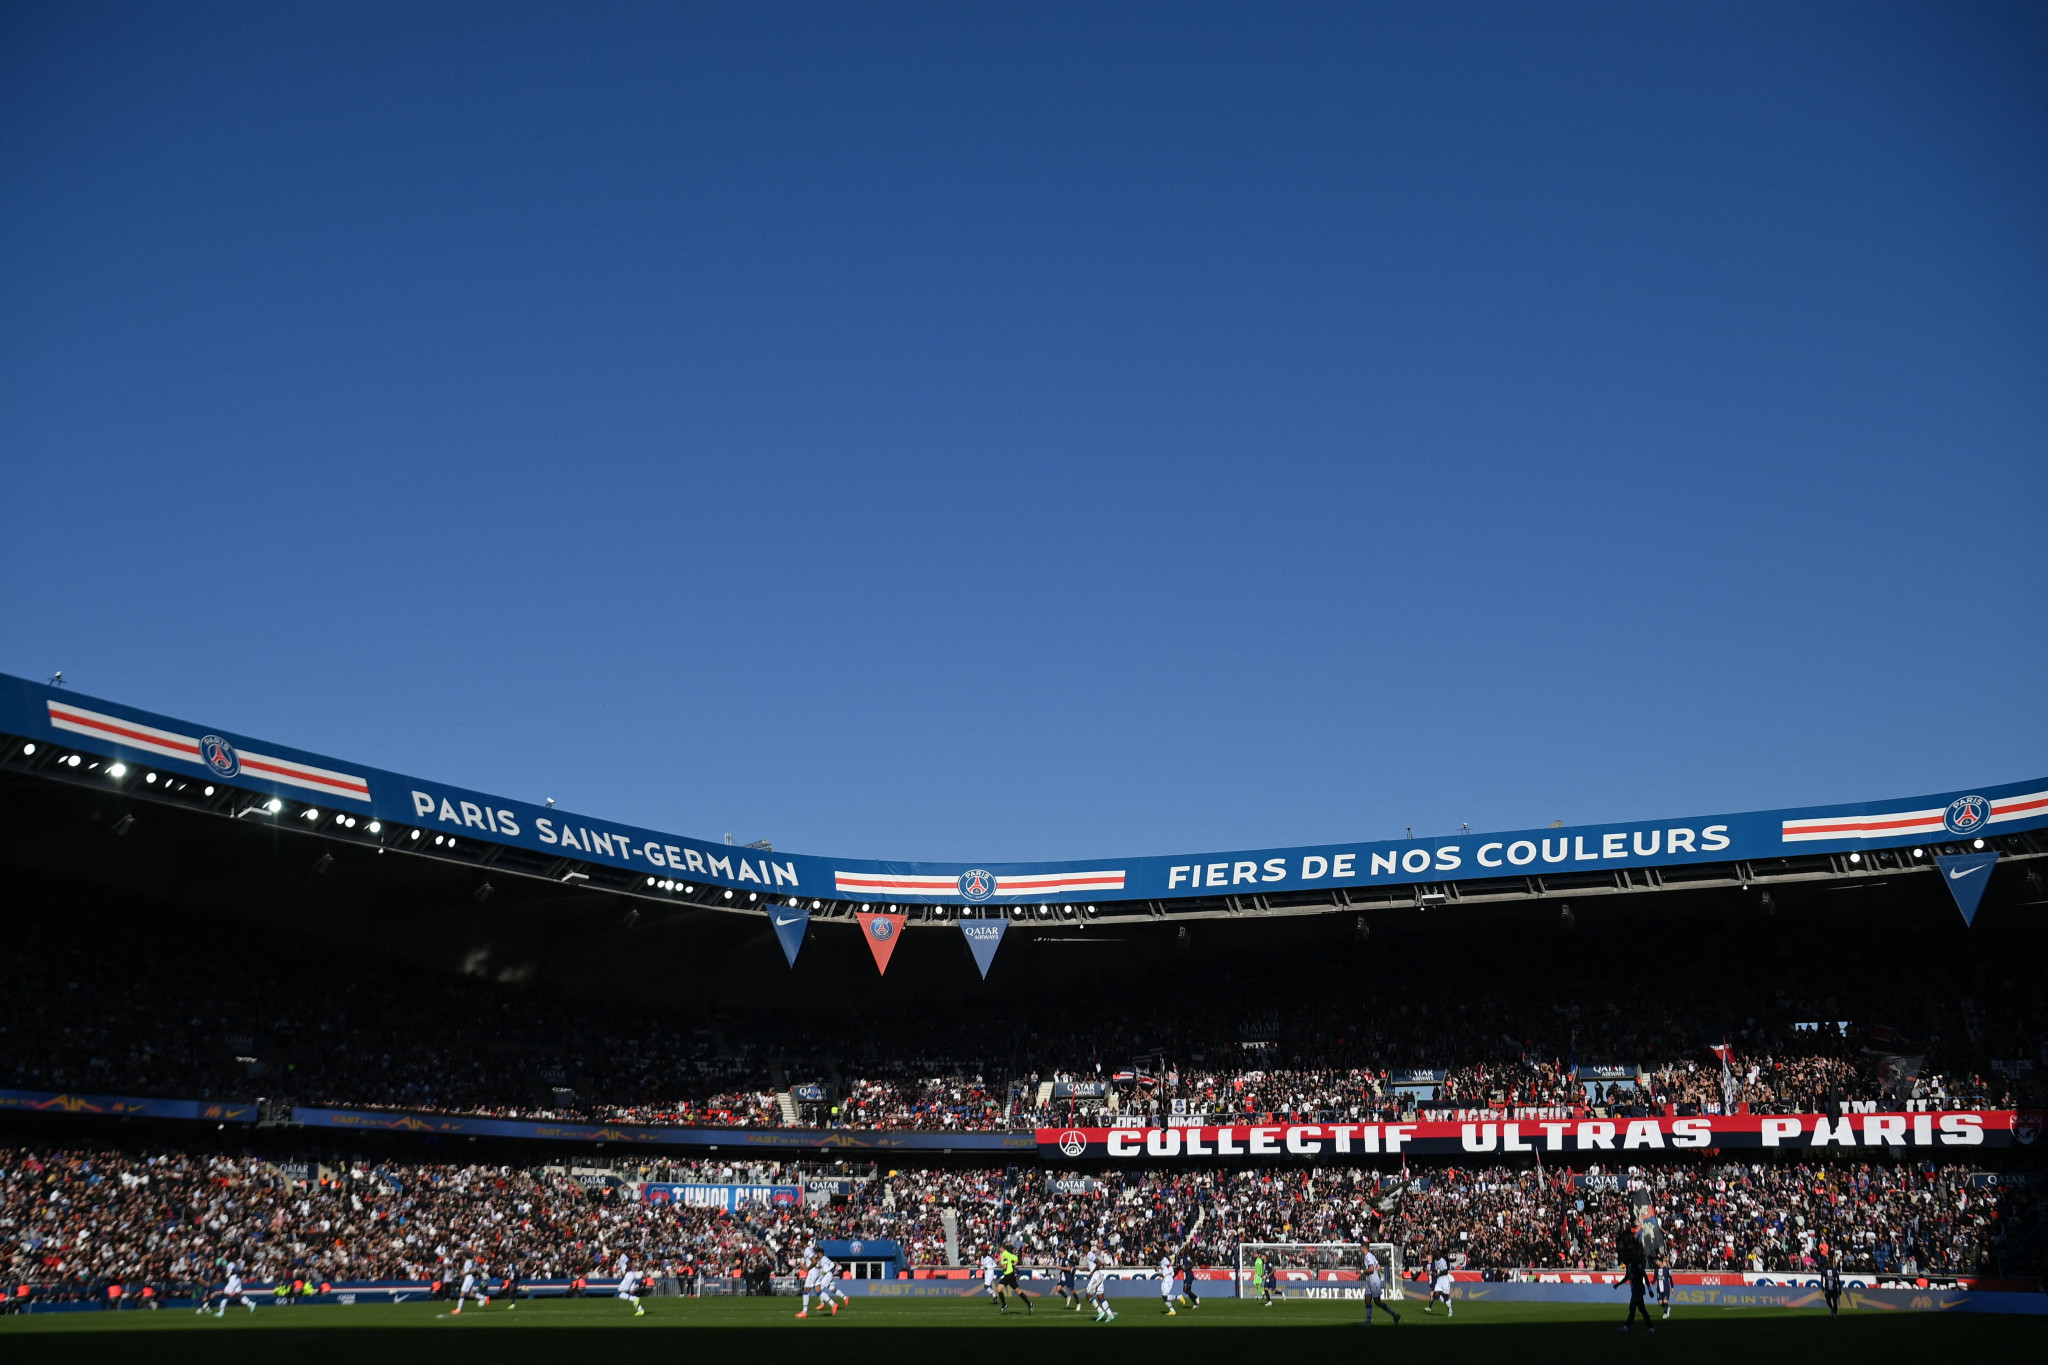 Auxerre fans unveiled banners at the Parc des Princes protesting the FIFA World Cup in Qatar ©Getty Images